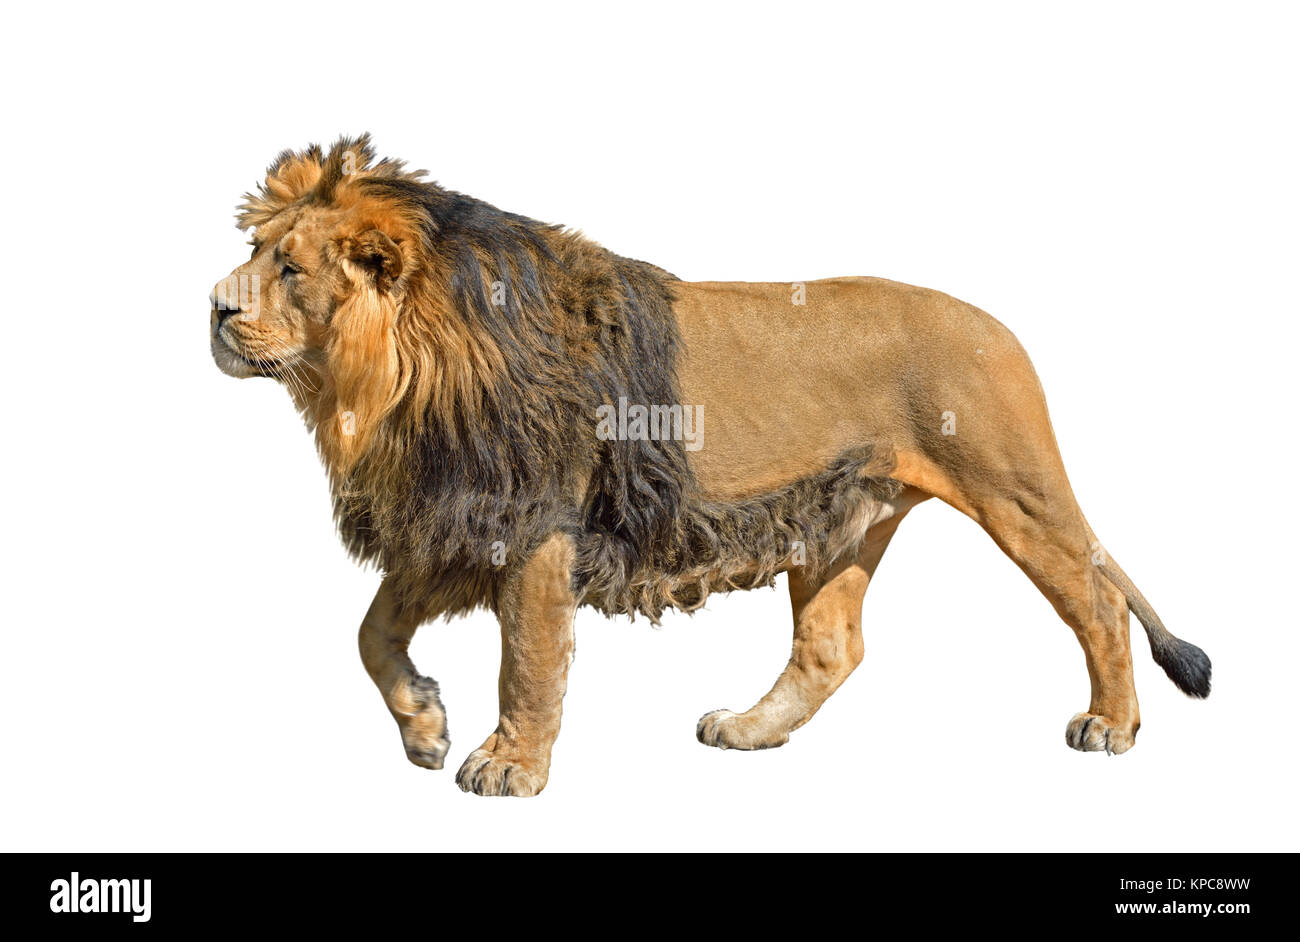 Asiatic lion (Panthera leo persica) (isolated) Stock Photo